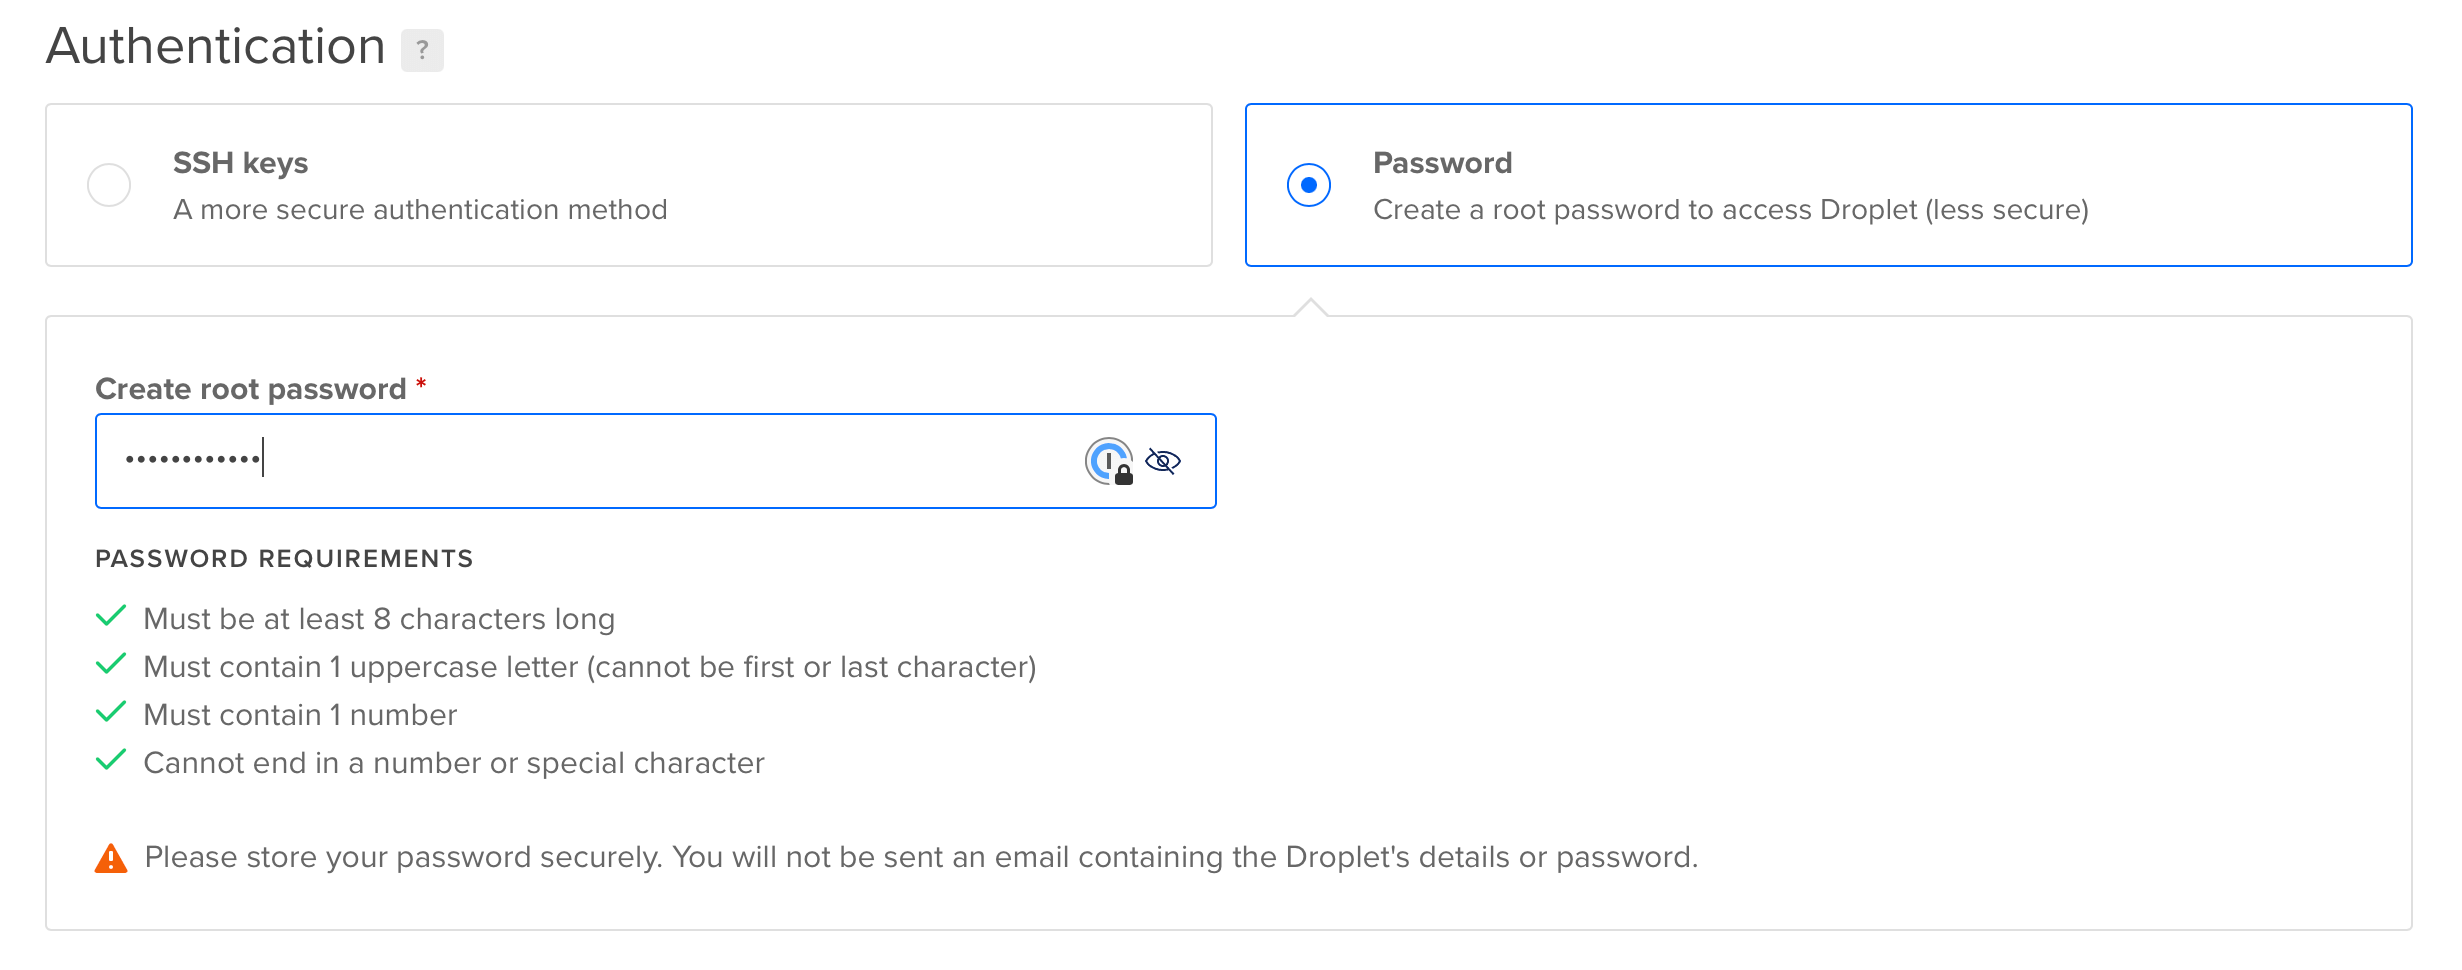 Screenshot showing the authentication selection